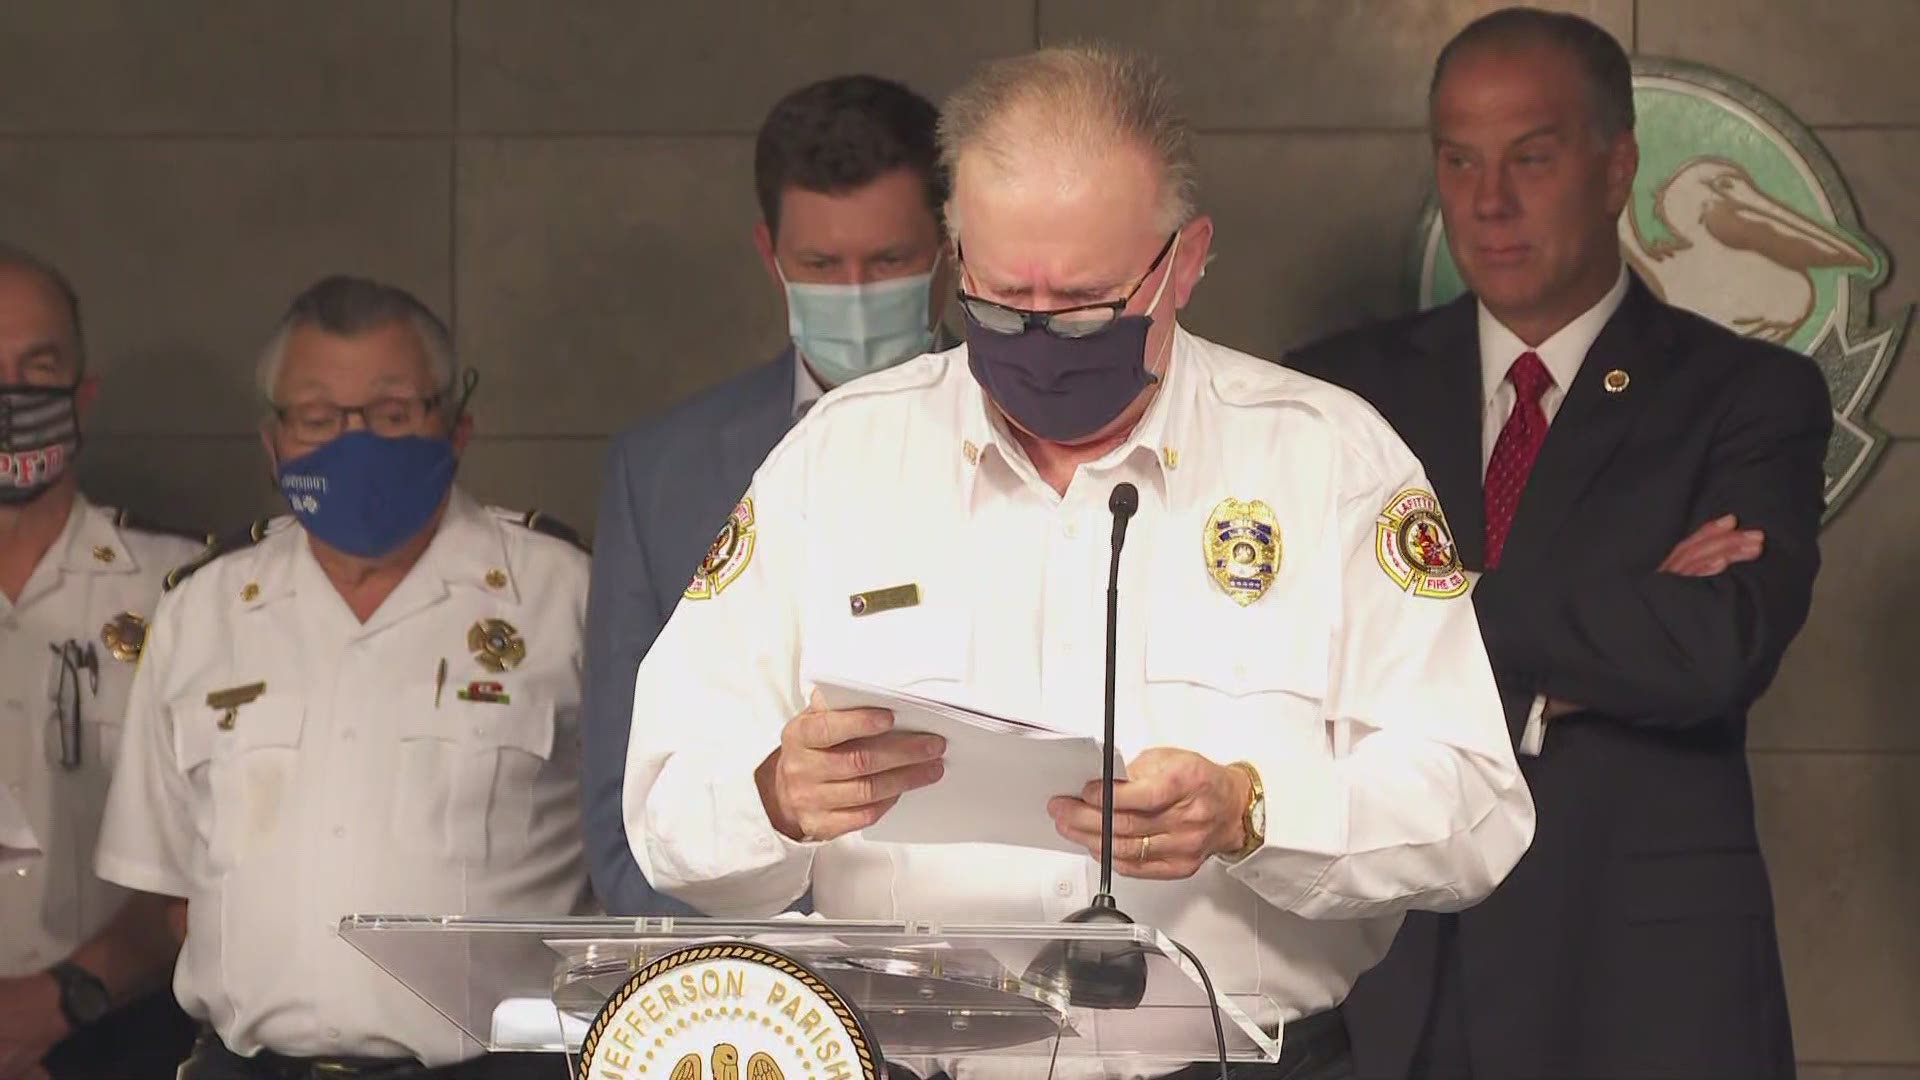 The Lafitte Fire Department Chief Linton Duet gets emotional as he reads that his office has received the highest classification possible for fire safety.